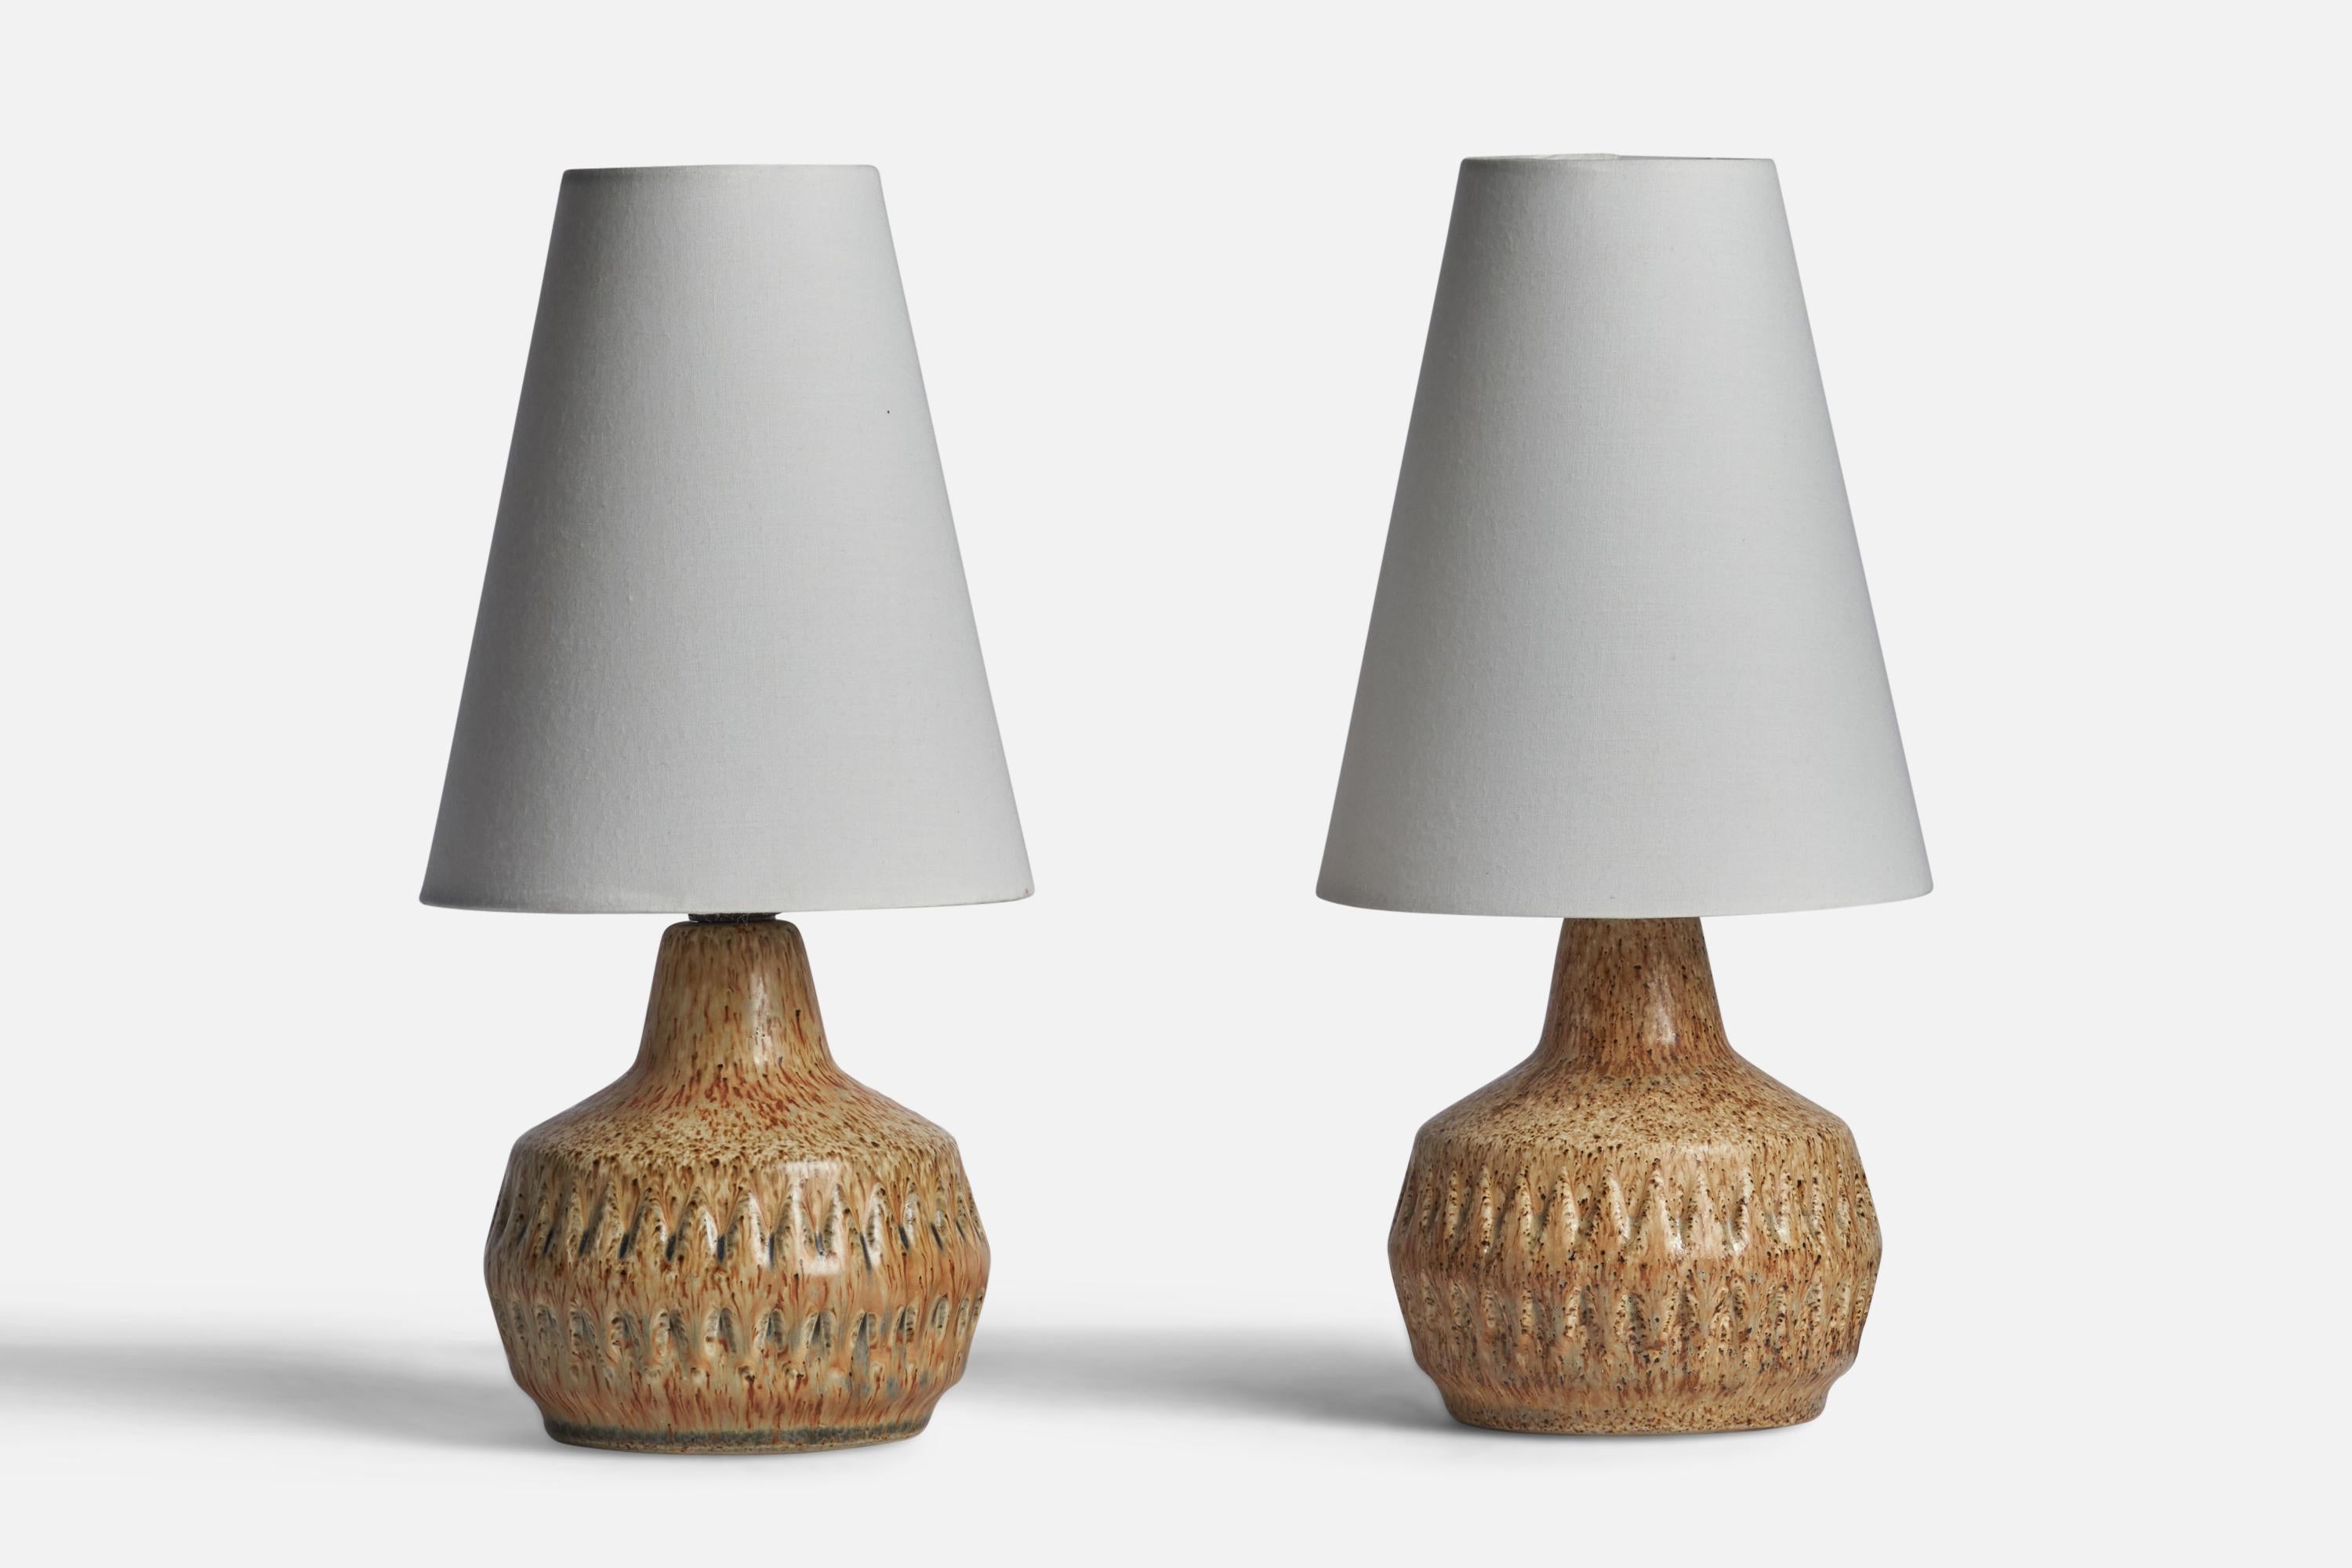 A pair of beige-glazed stoneware table lamps designed by Bruno Karlsson and produced by Ego Stengods, Sweden, c. 1960s.

Dimensions of Lamp (inches): 7” H x 4.75” Diameter
Dimensions of Shade (inches): 2.75” Top Diameter x 5.5” Bottom Diameter x